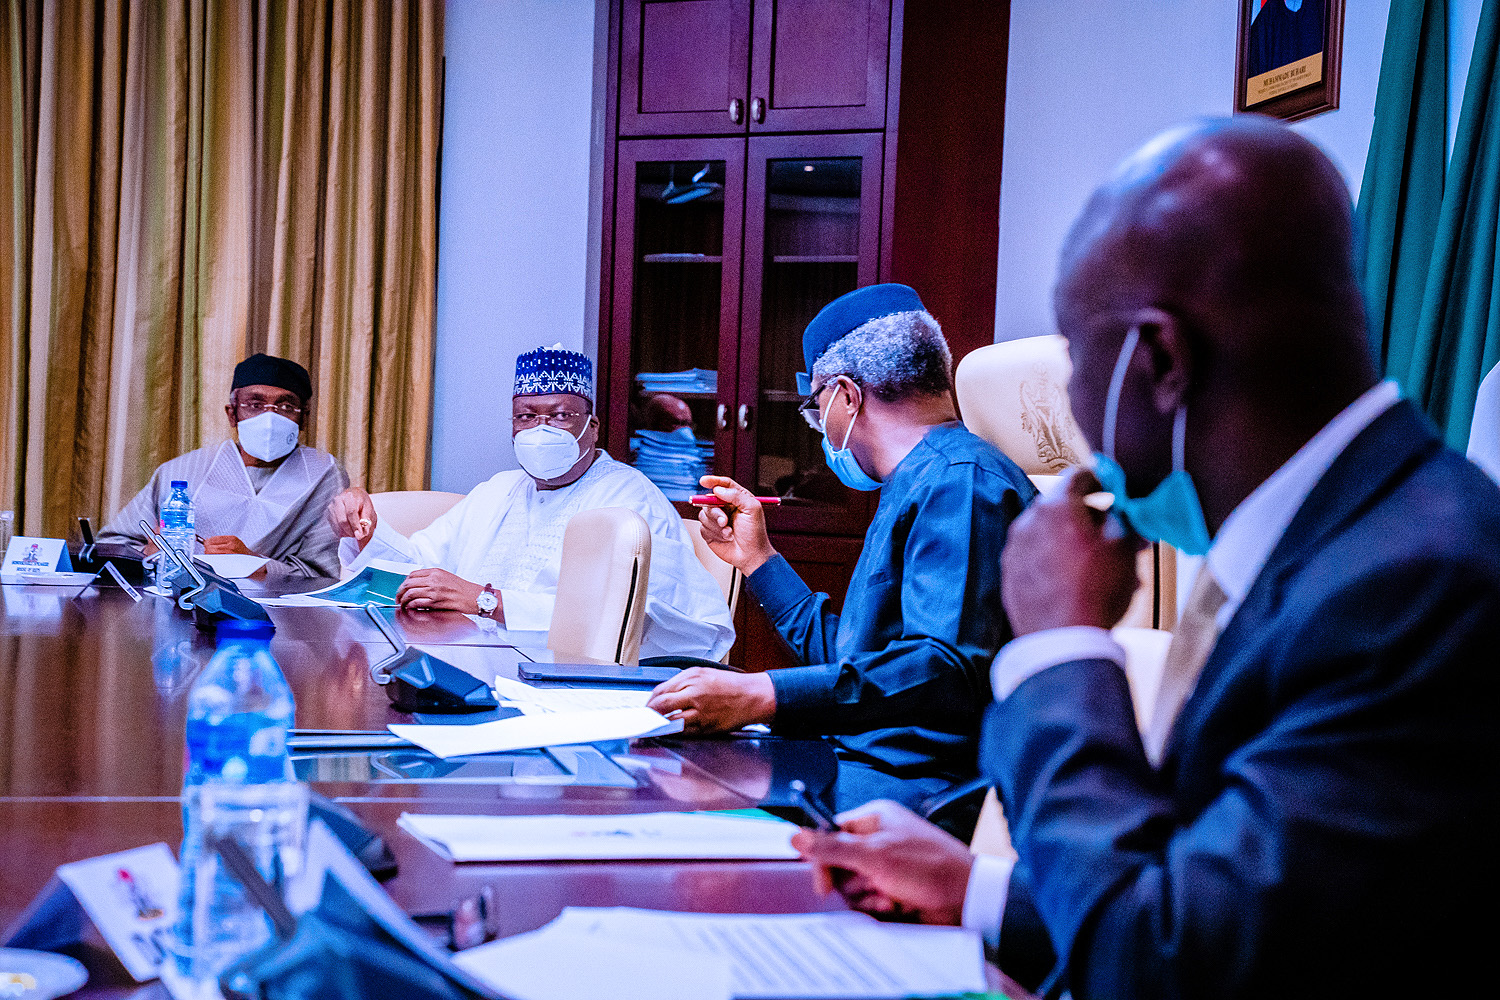 VP Osinbajo Meets With National Assembly Leaders Regarding Power Sector on 02/07/2020